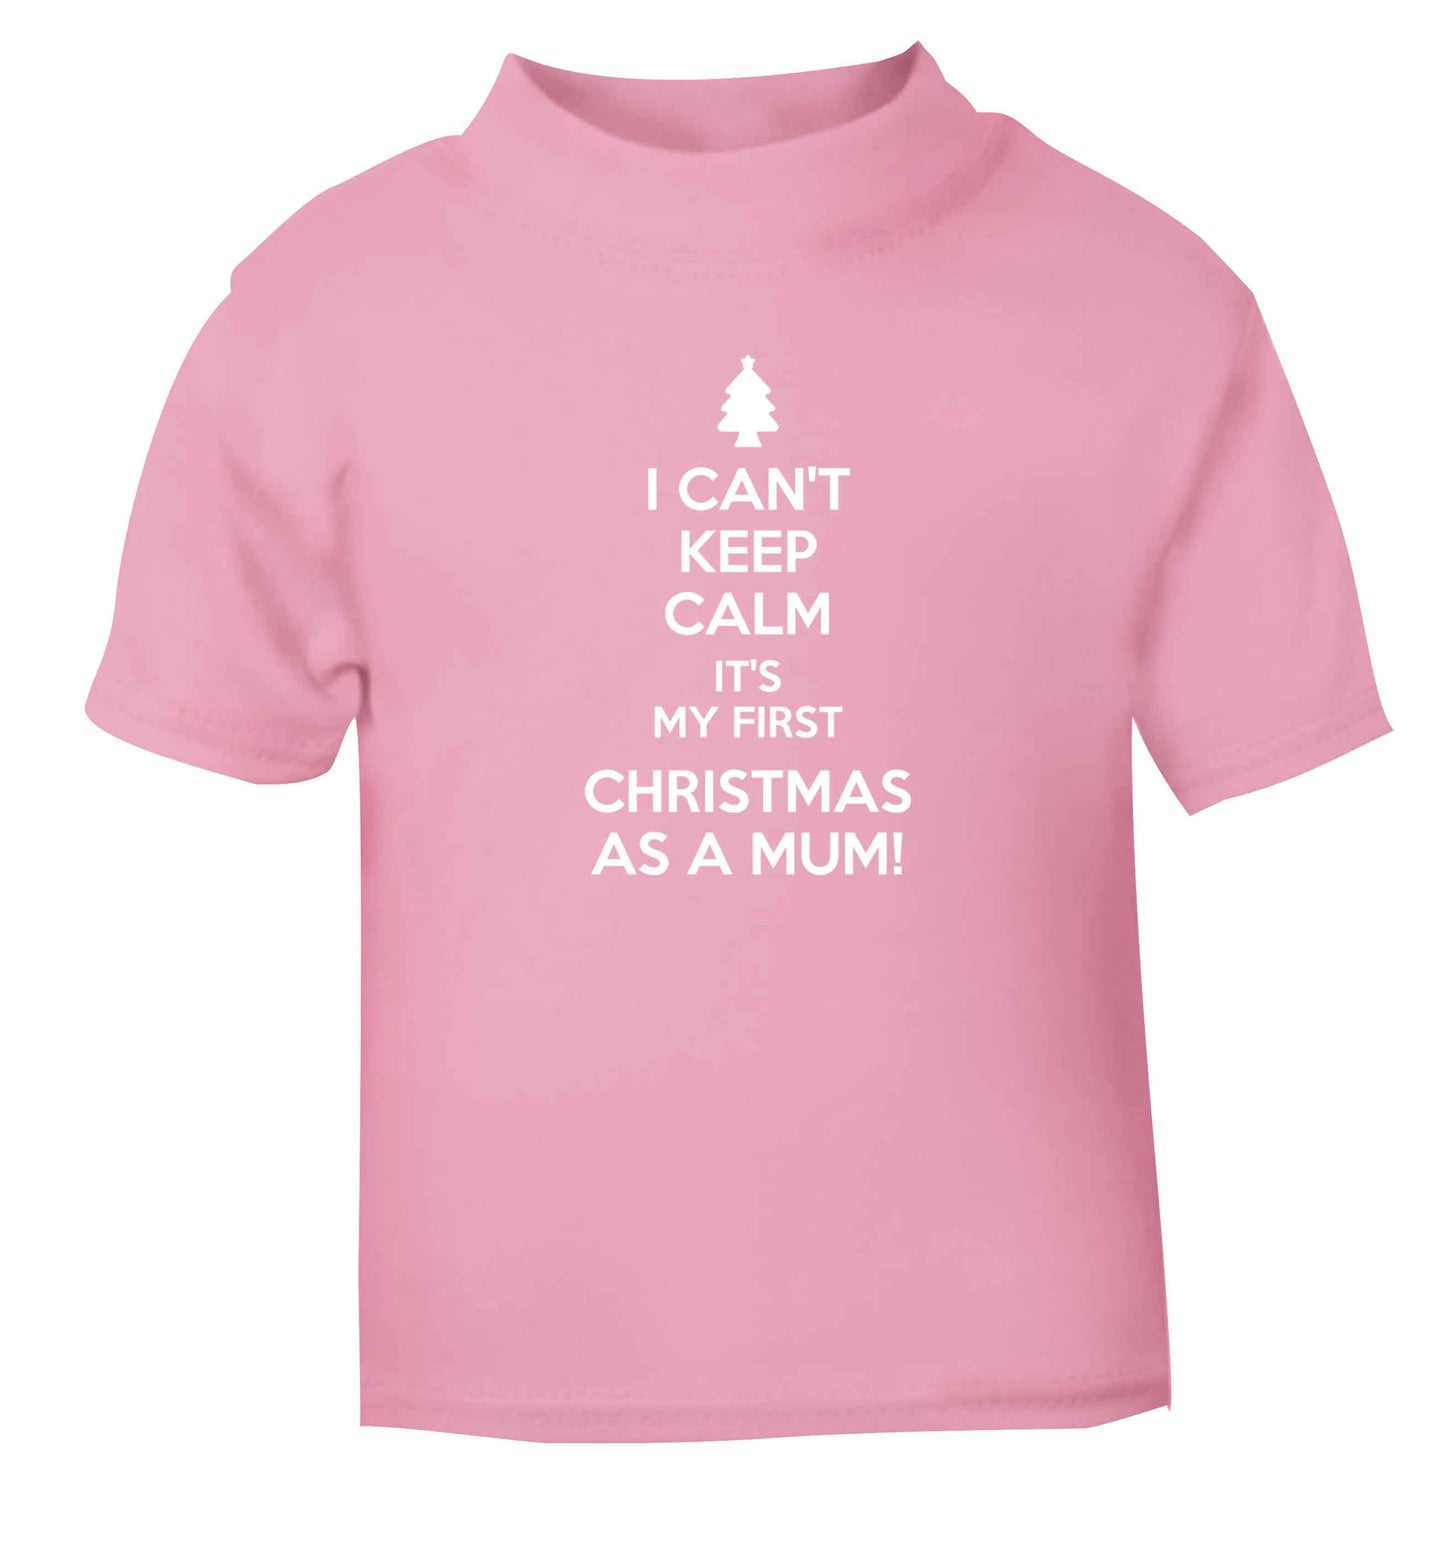 I can't keep calm it's my first Christmas as a mum light pink Baby Toddler Tshirt 2 Years